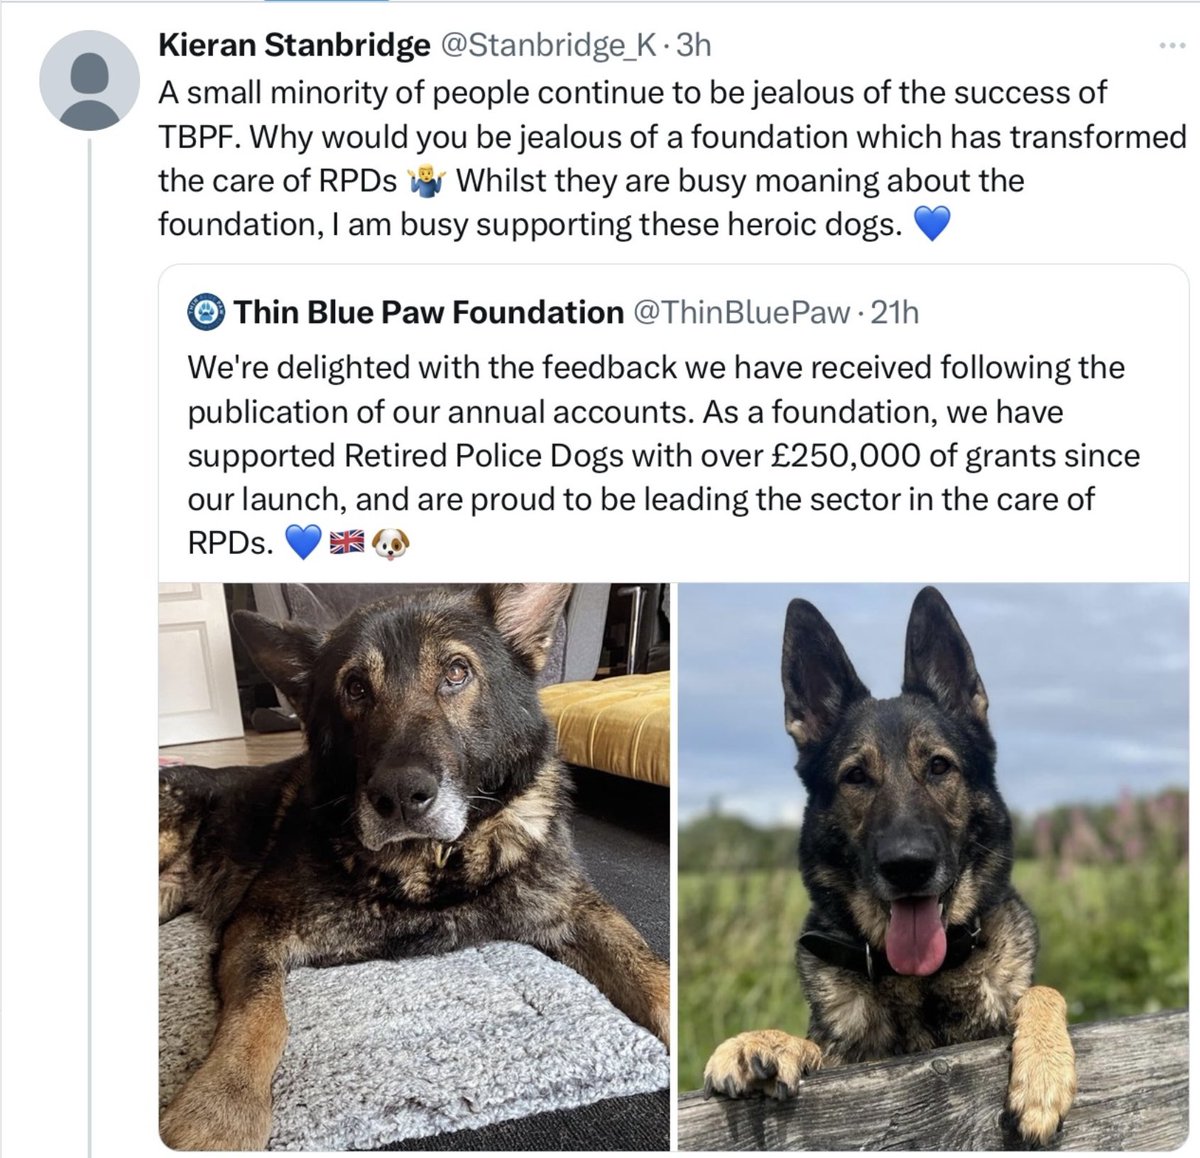 No ‘Not Jealous’ Mr Stanbridge Chair ThinBluePaw but ‘Informative’ Anyone donating need to be aware ONLY 26p in EVERY £1 supports RetPoliceDogs & 52p in the £1 goes to Admin + Other Expenses 
Source 3 x TBP published reports 
That’s not a good return for your Core Purpose Is It